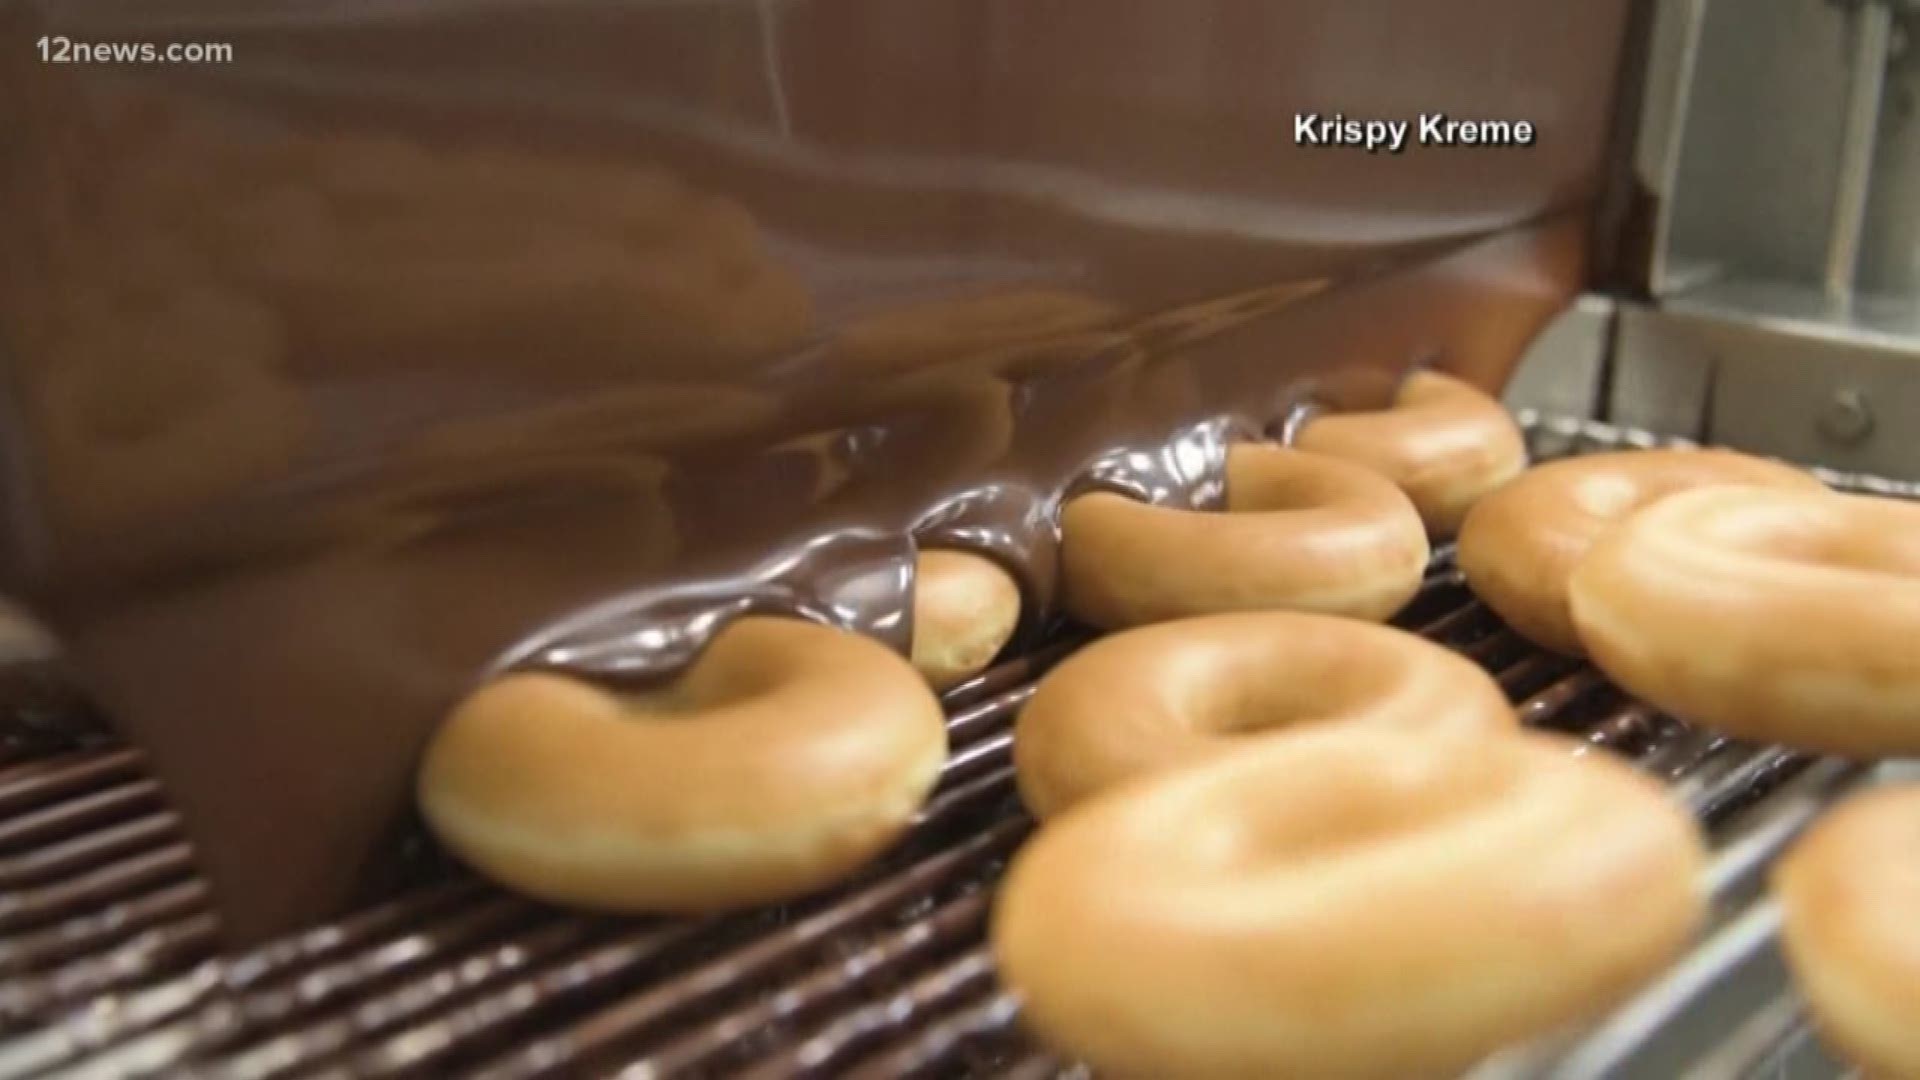 Krispy Kreme's chocolate glazed donuts are back and will be sold first Friday of every month.